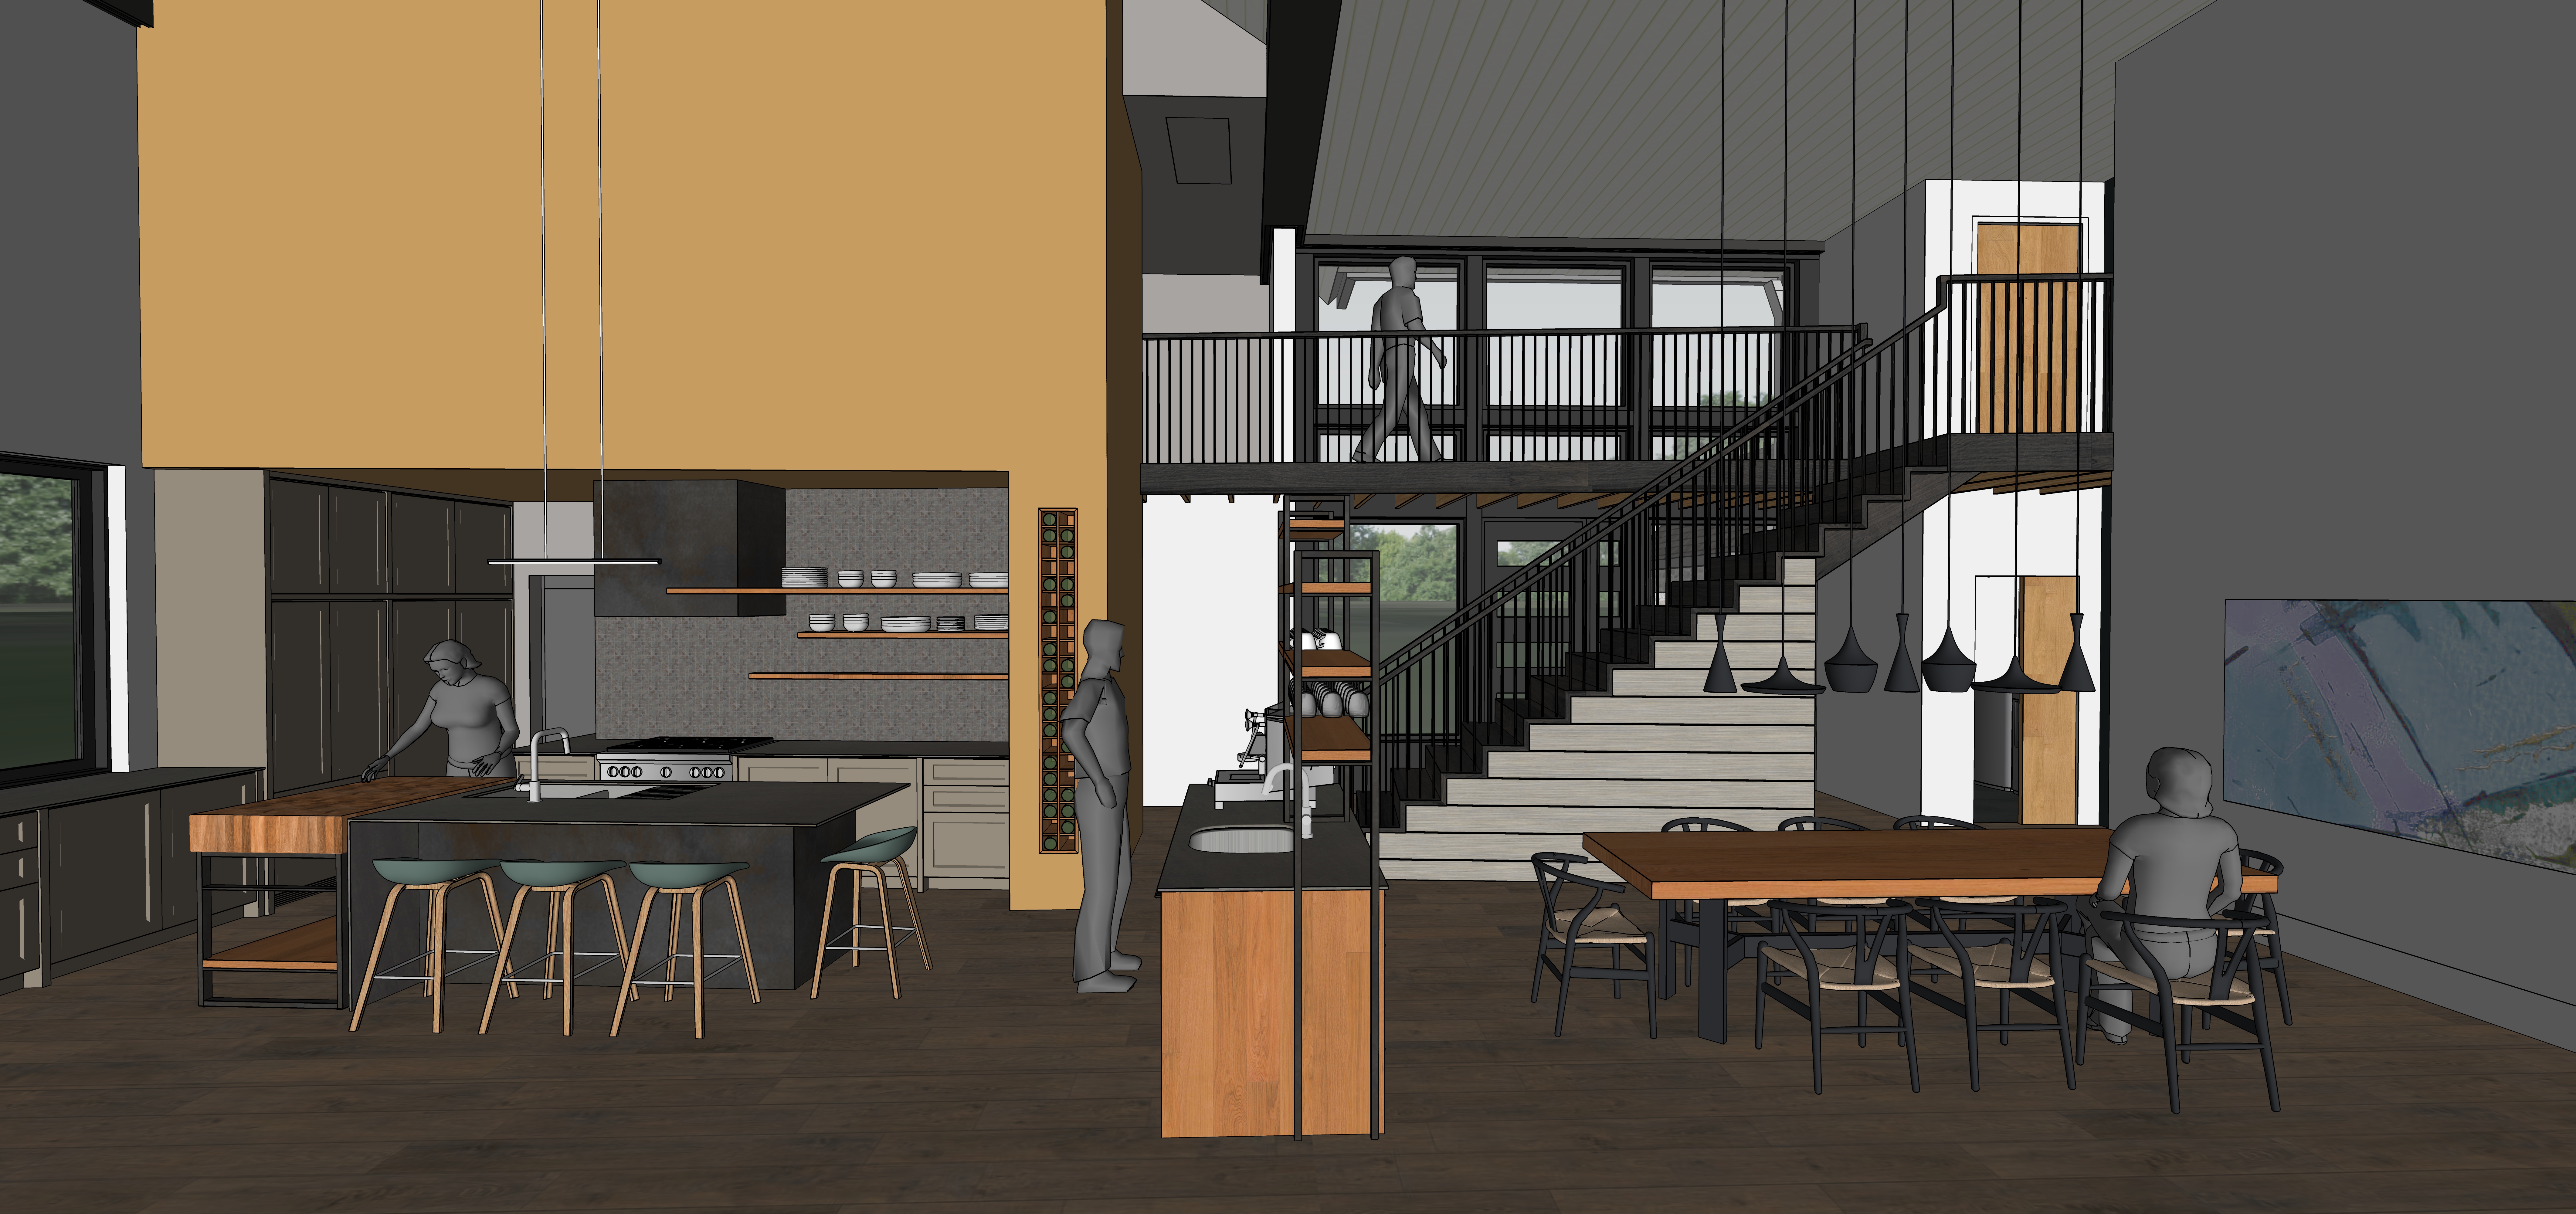 rendering of house interior